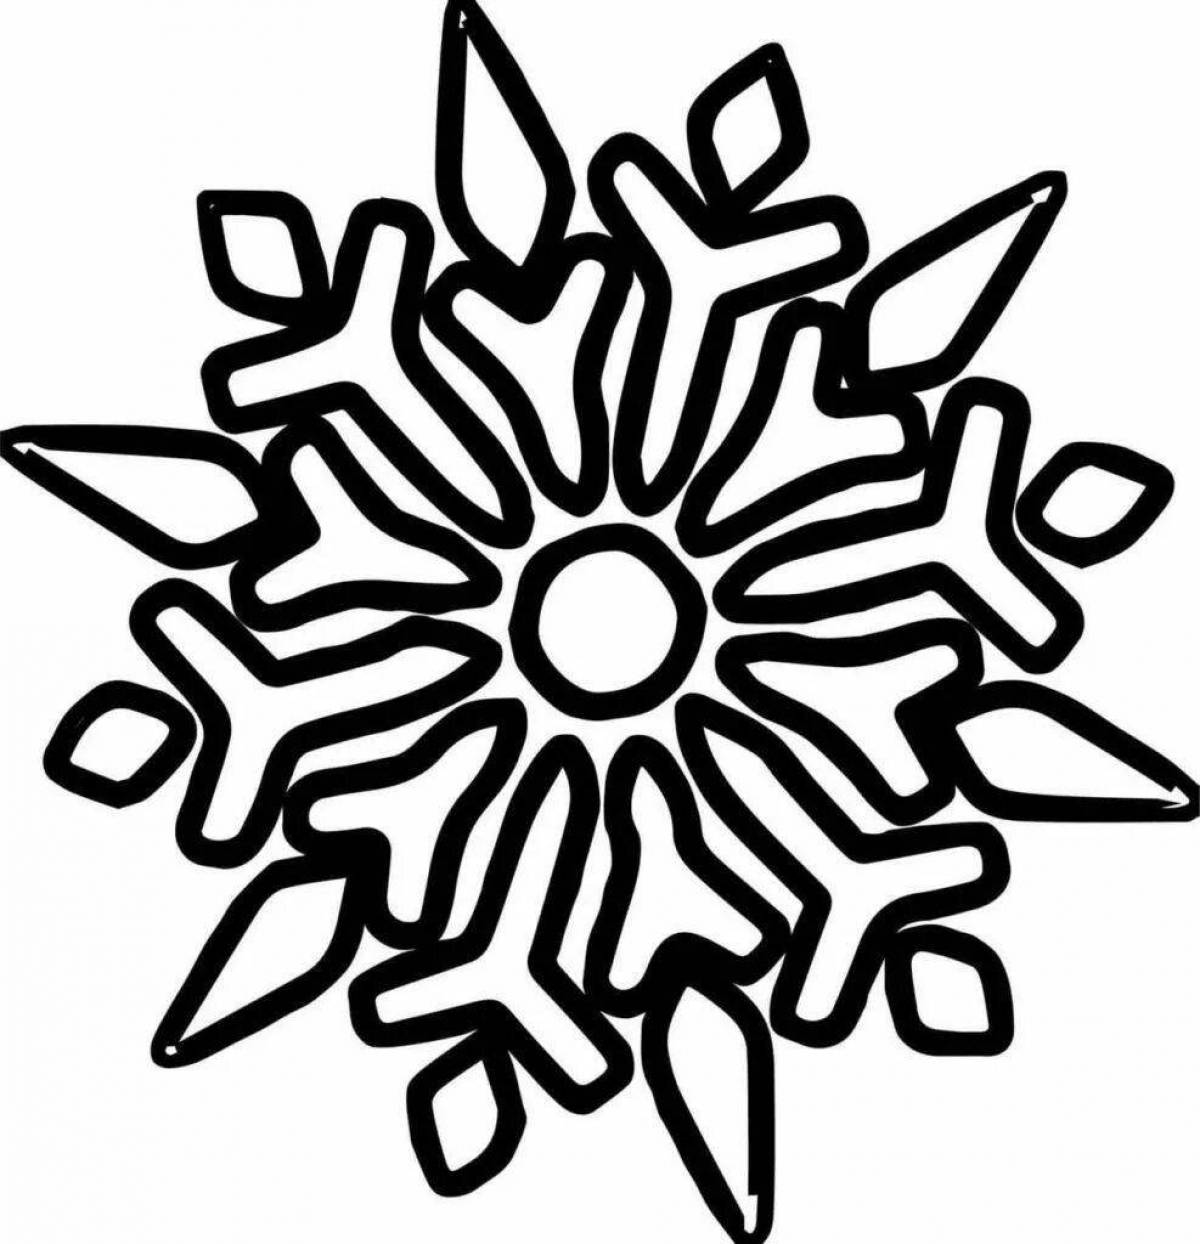 Violent coloring of snowflakes for children 4-5 years old in kindergarten